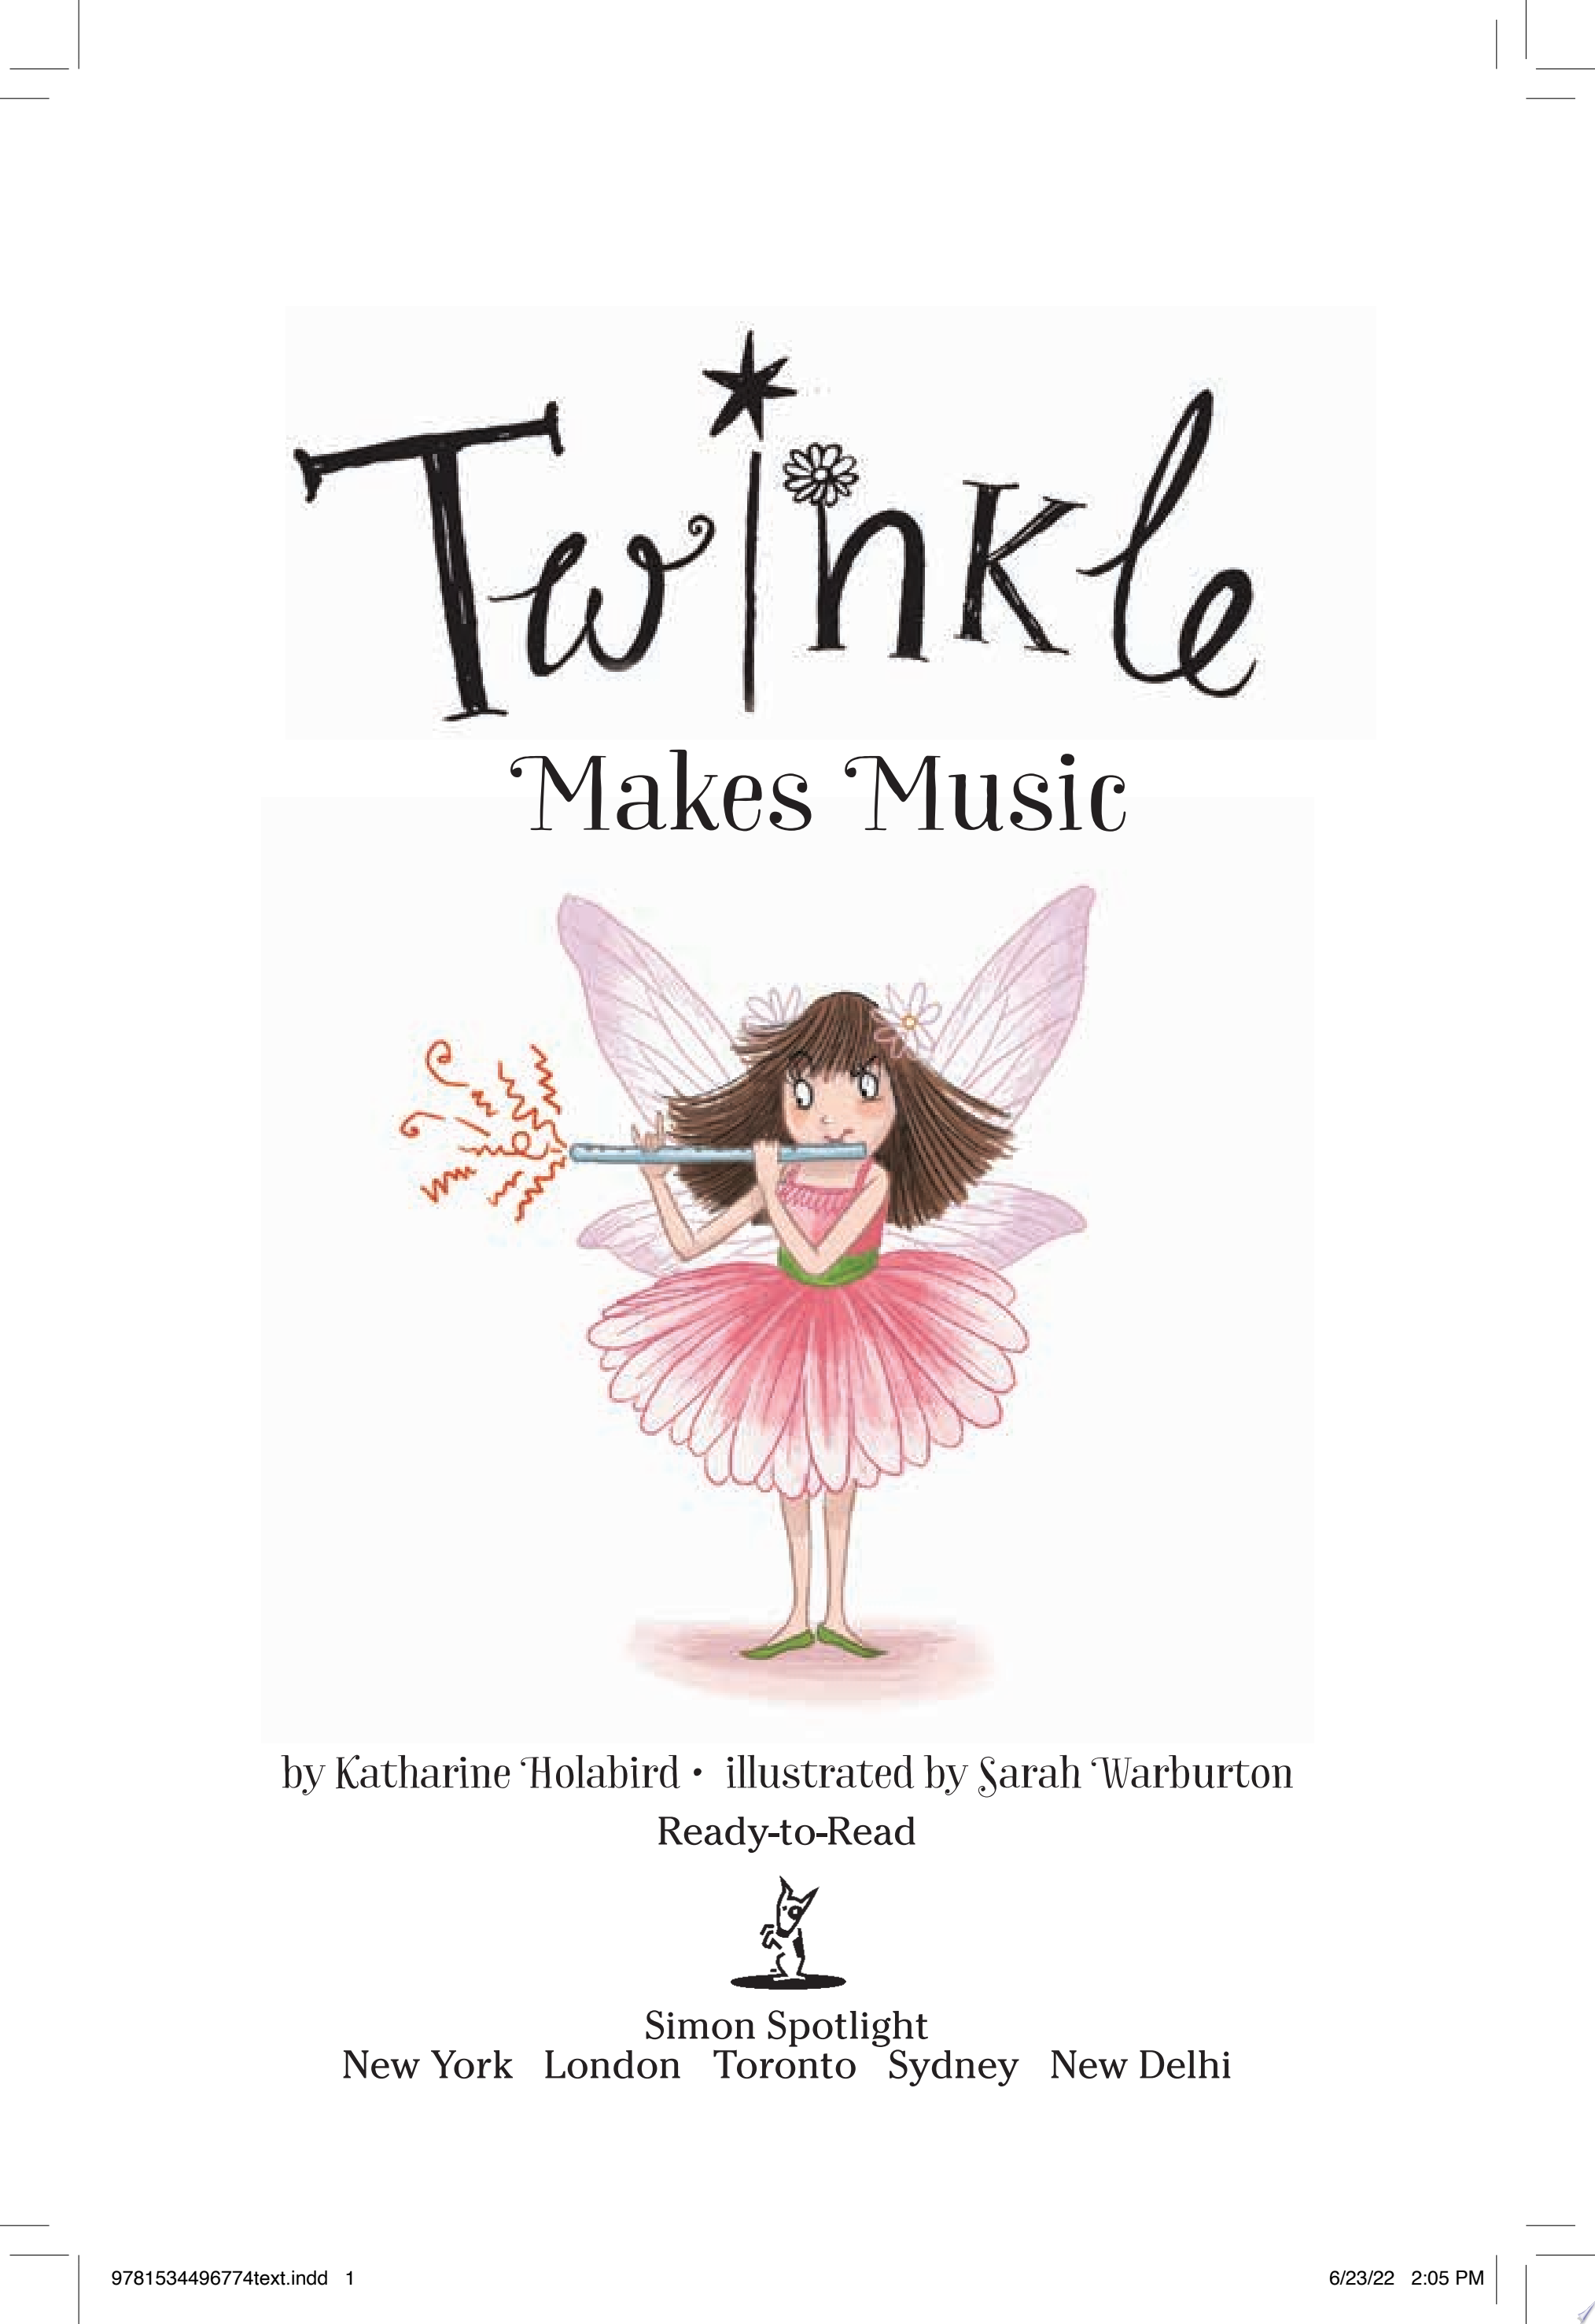 Image for "Twinkle Makes Music"